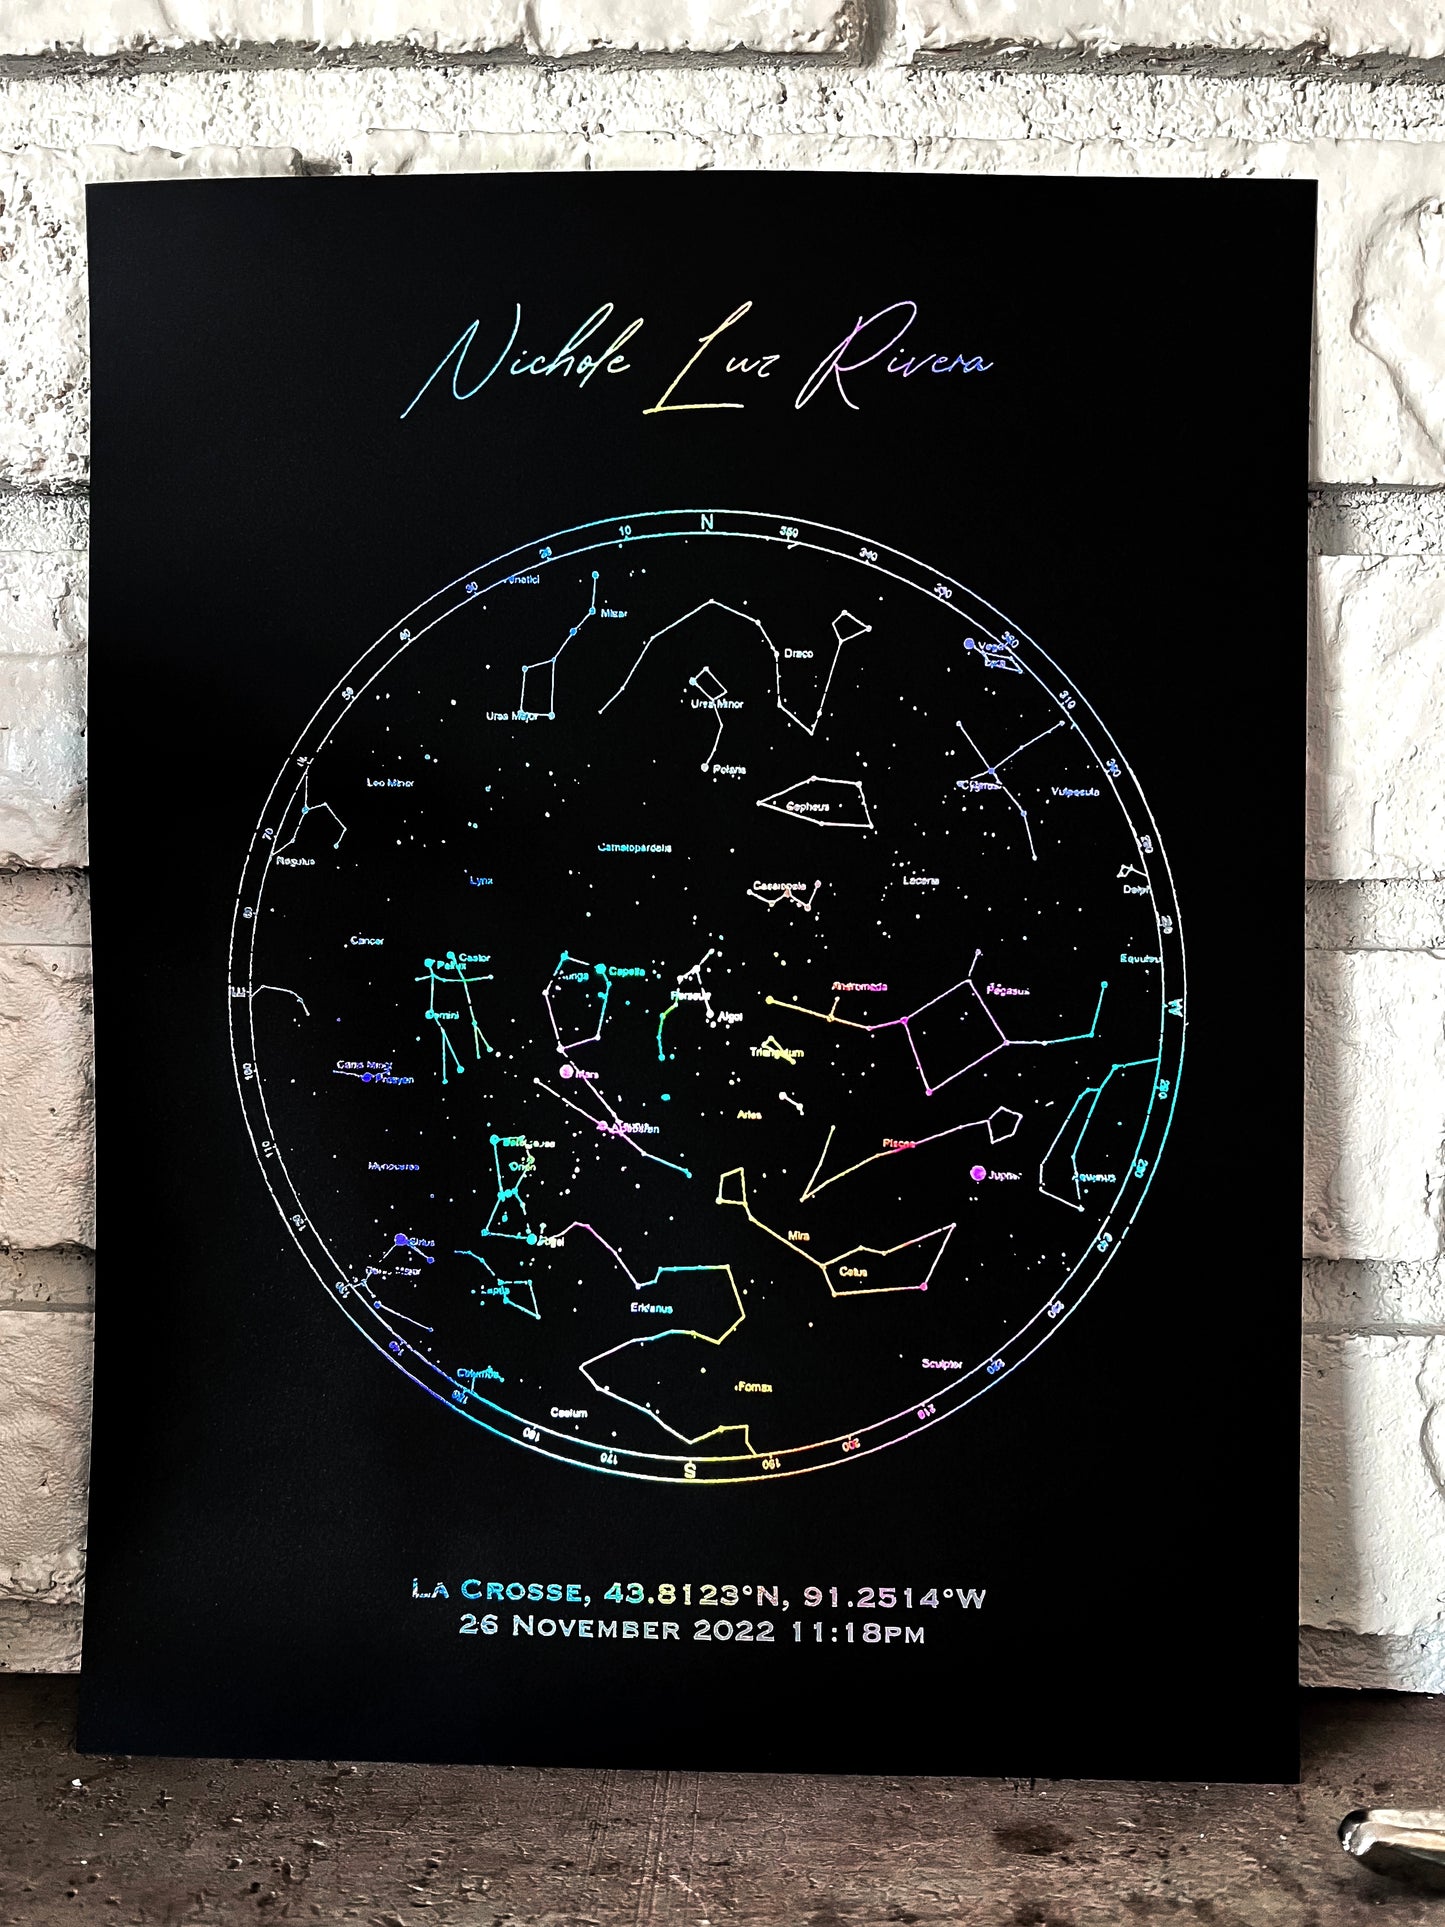 Personalized Star Map Foil Print